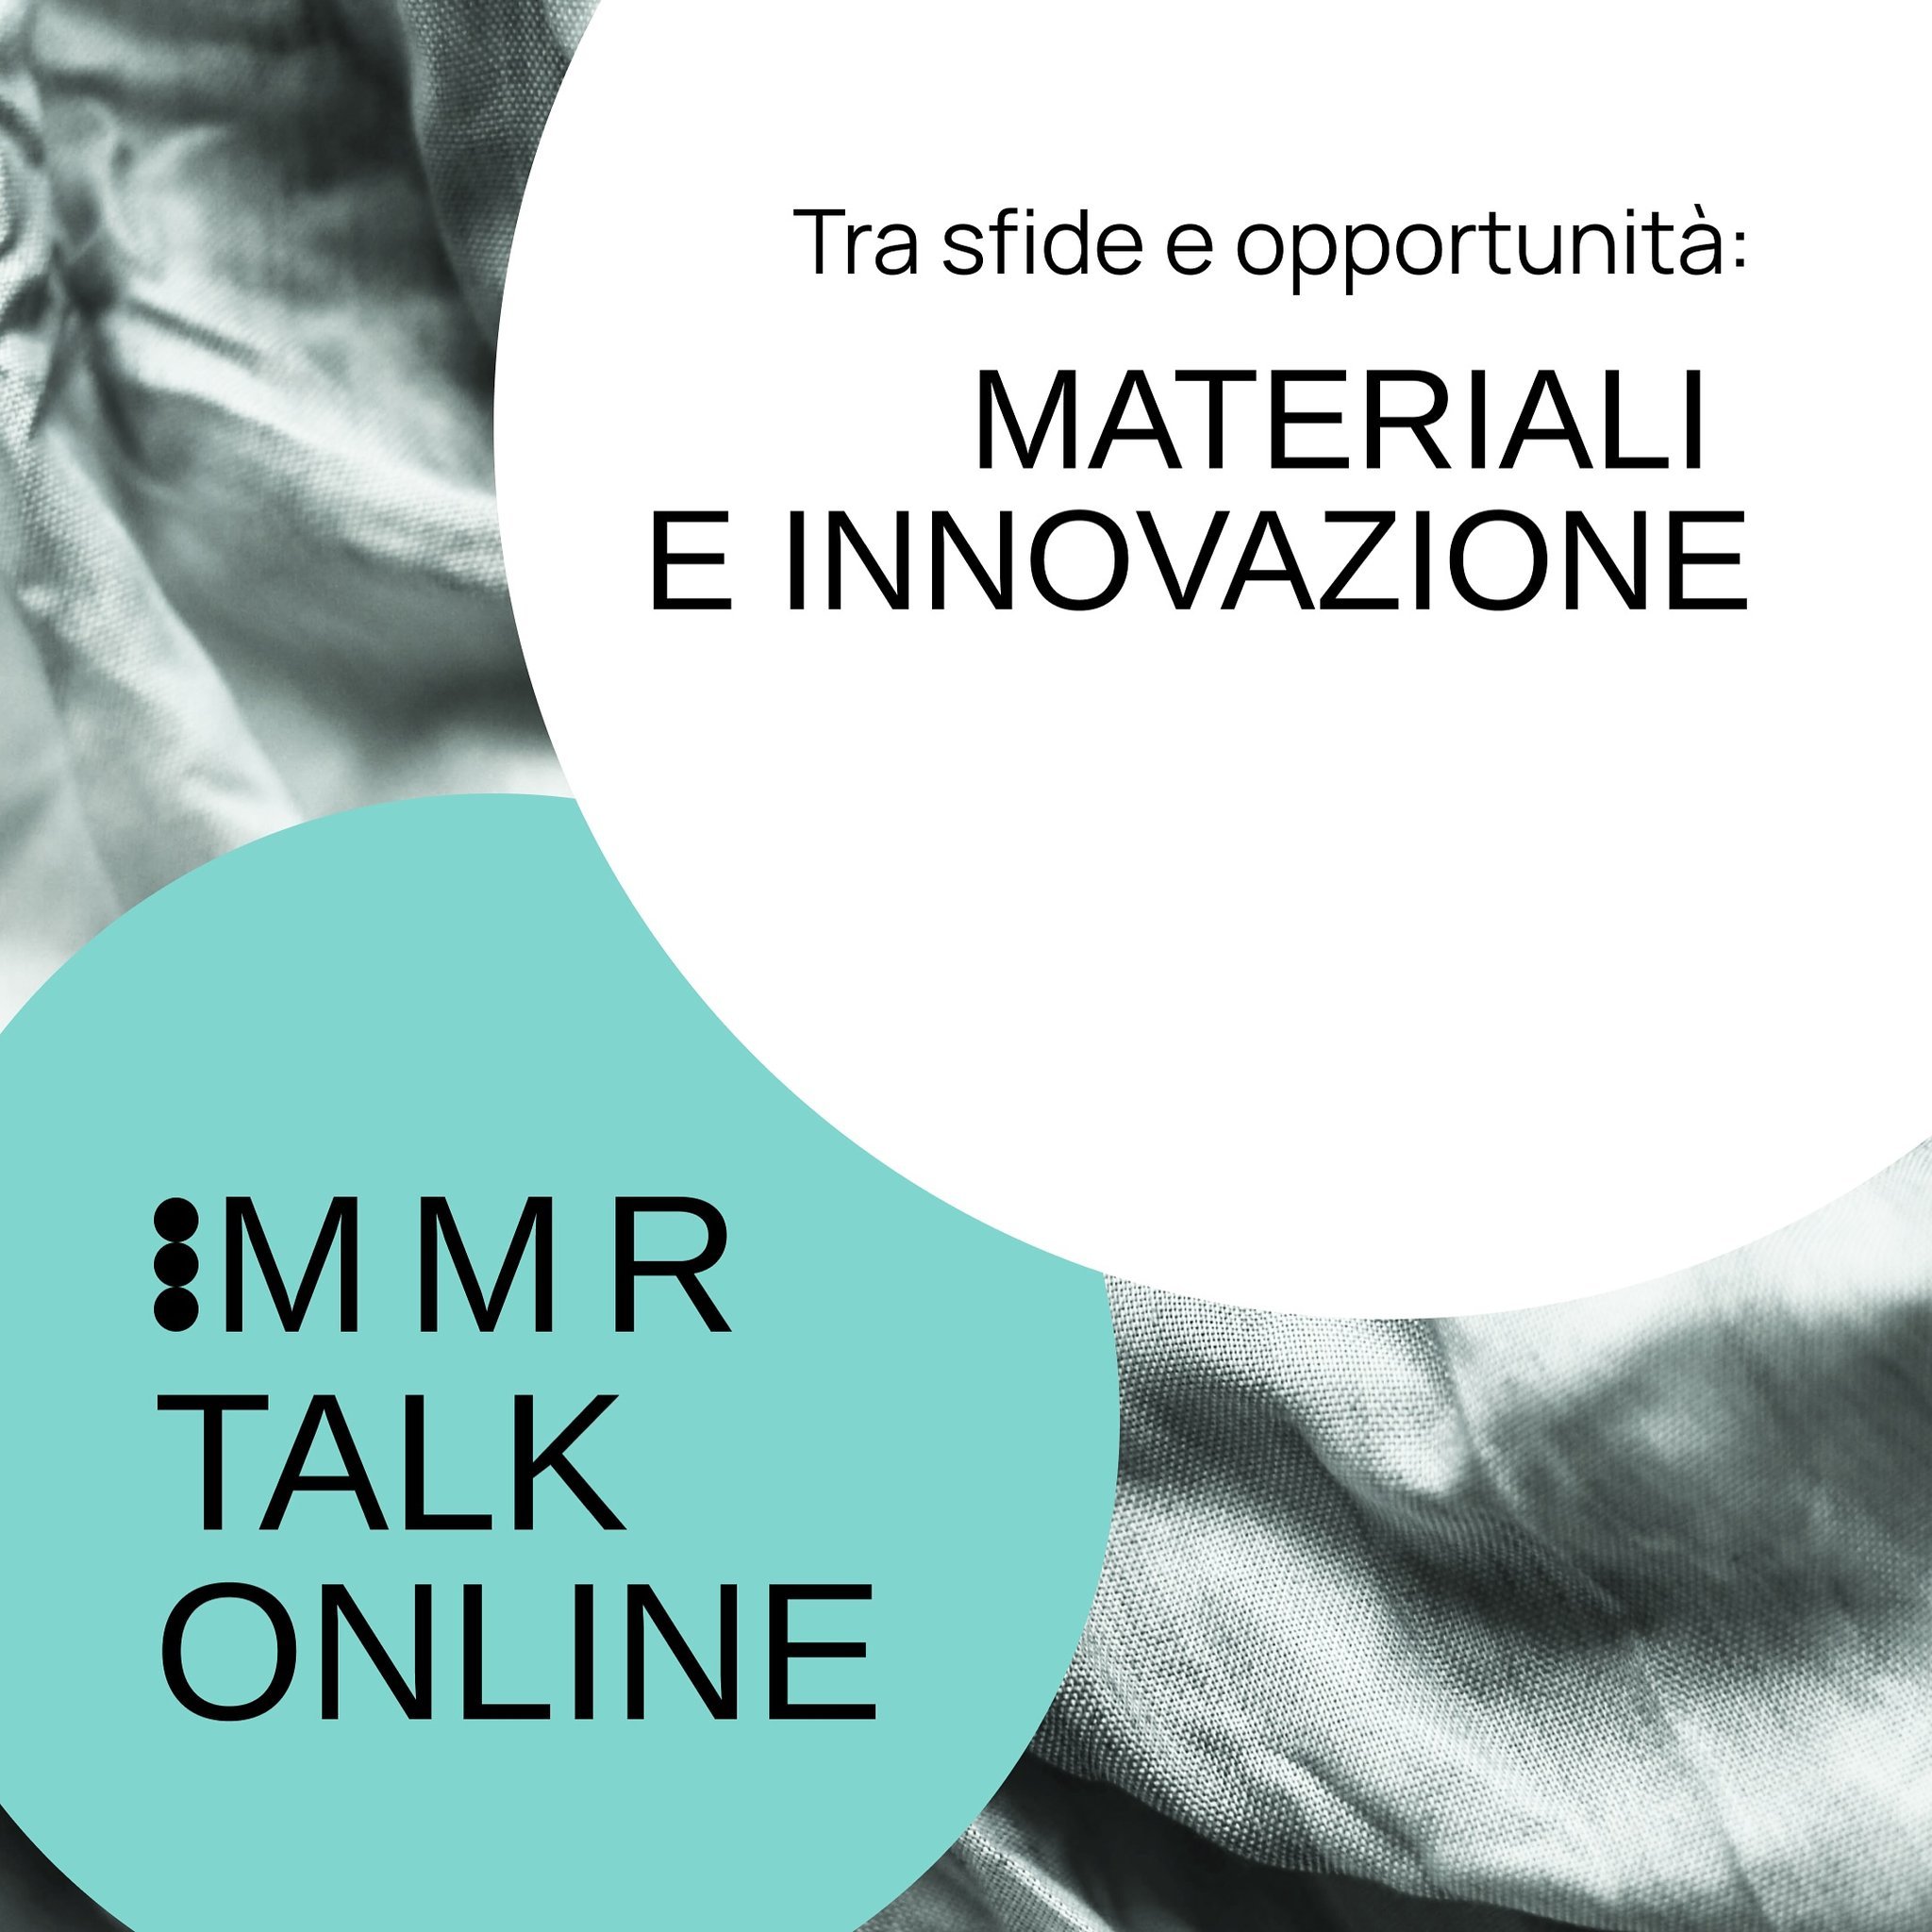 We are pleased to announce the third talk organized by Movimento Moda Responsabile!

Tonight at 6:00 PM, join us for the event &ldquo;Between Challenges and Opportunities: Materials and Innovation,&rdquo; a deep dive into innovative materials in fash